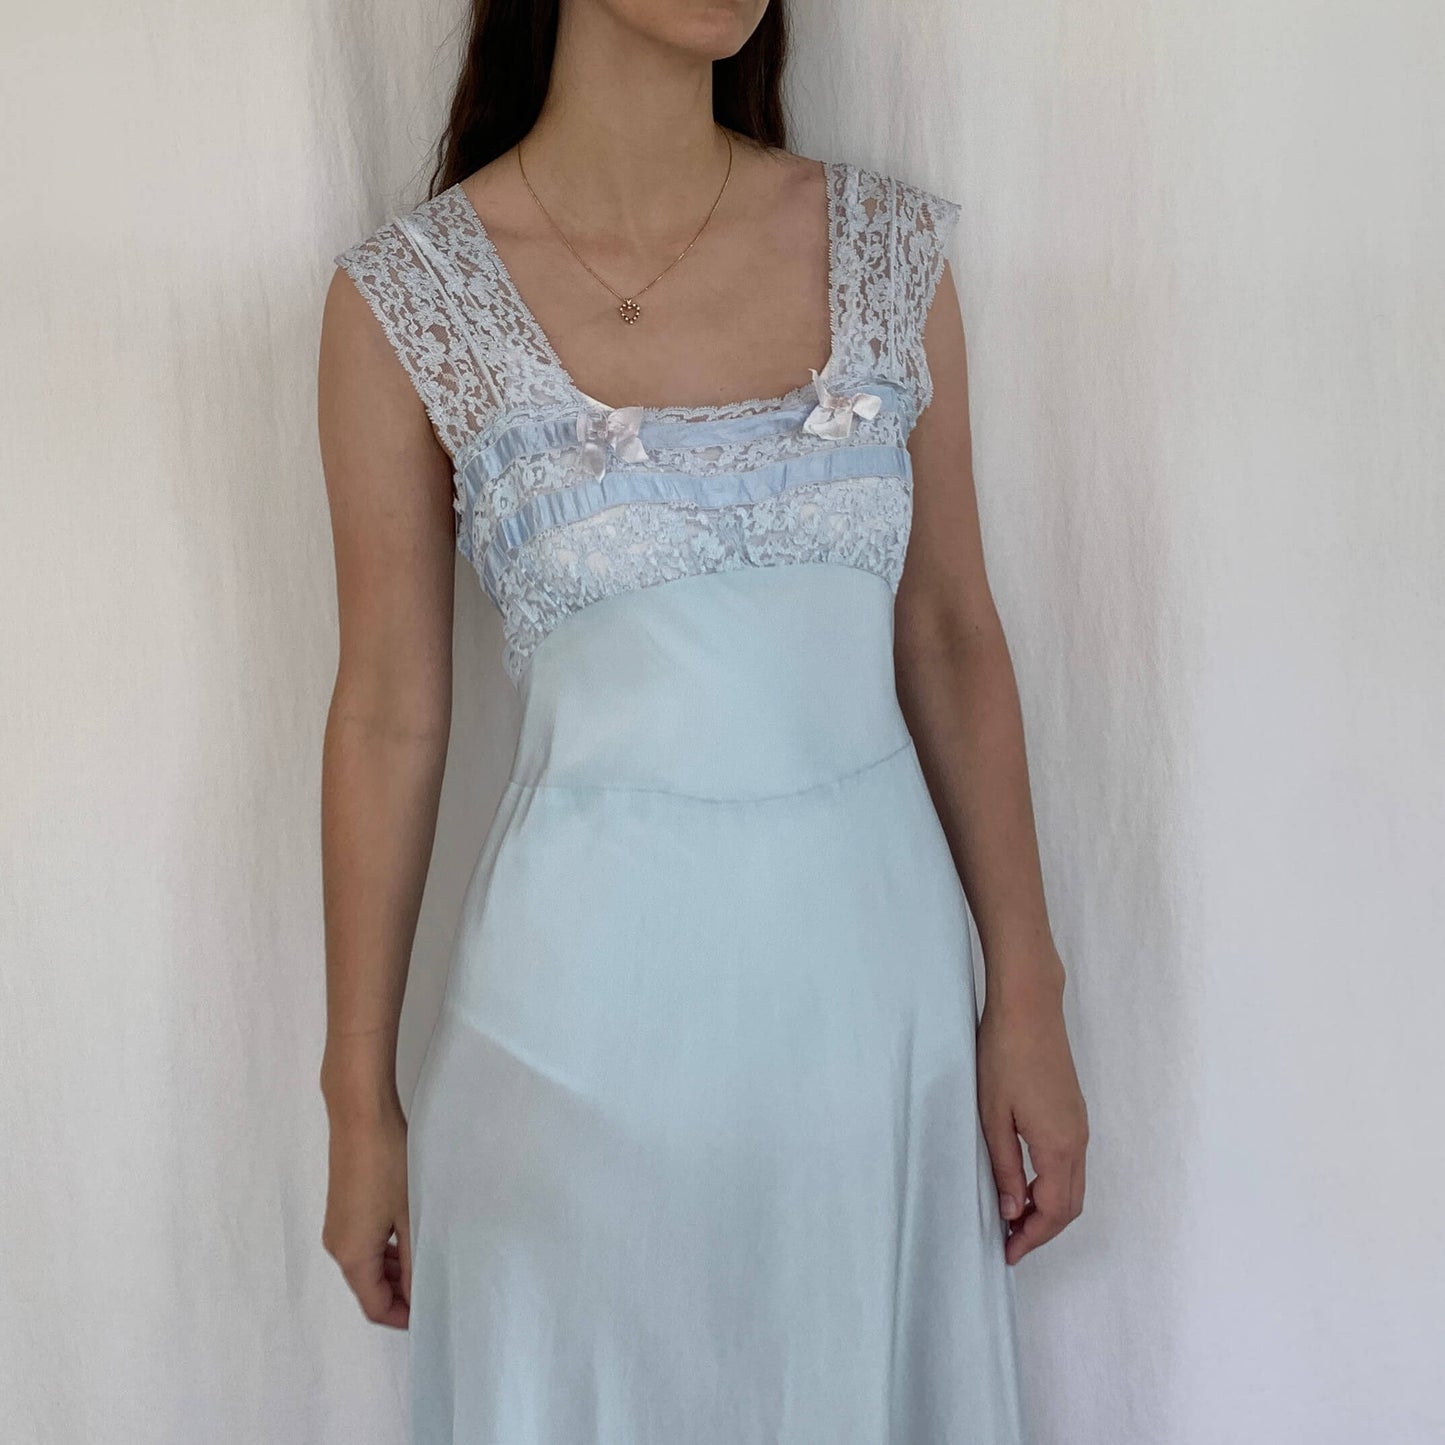 1930s nightgown on model showing lace bodice